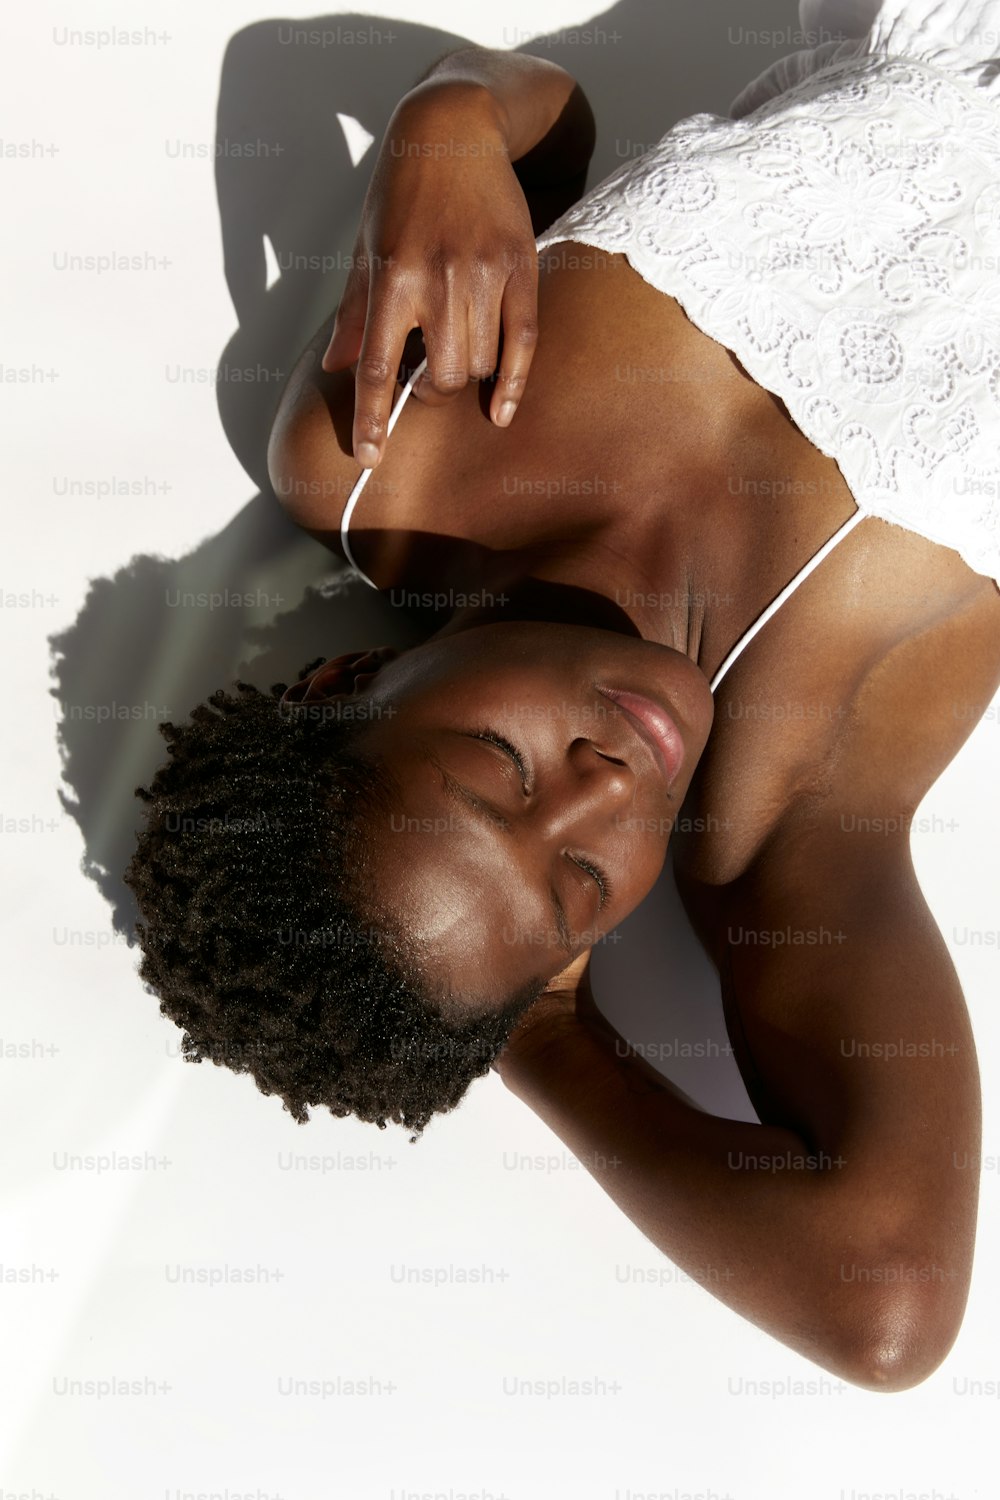 a woman in a white top is laying down